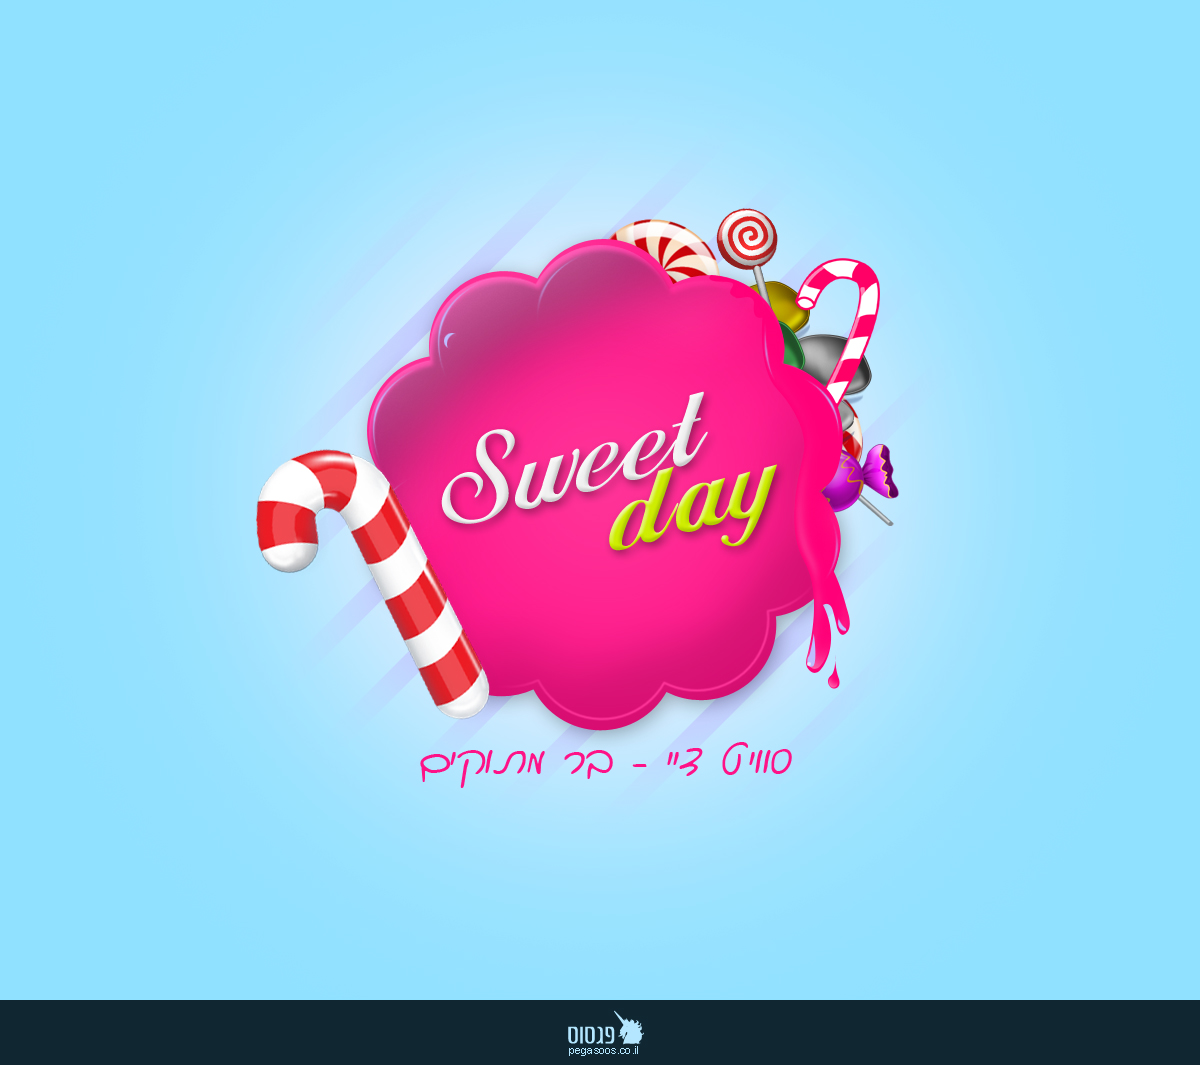 sweetday logo - candy bar company by 1PegaSooS1 on DeviantArt